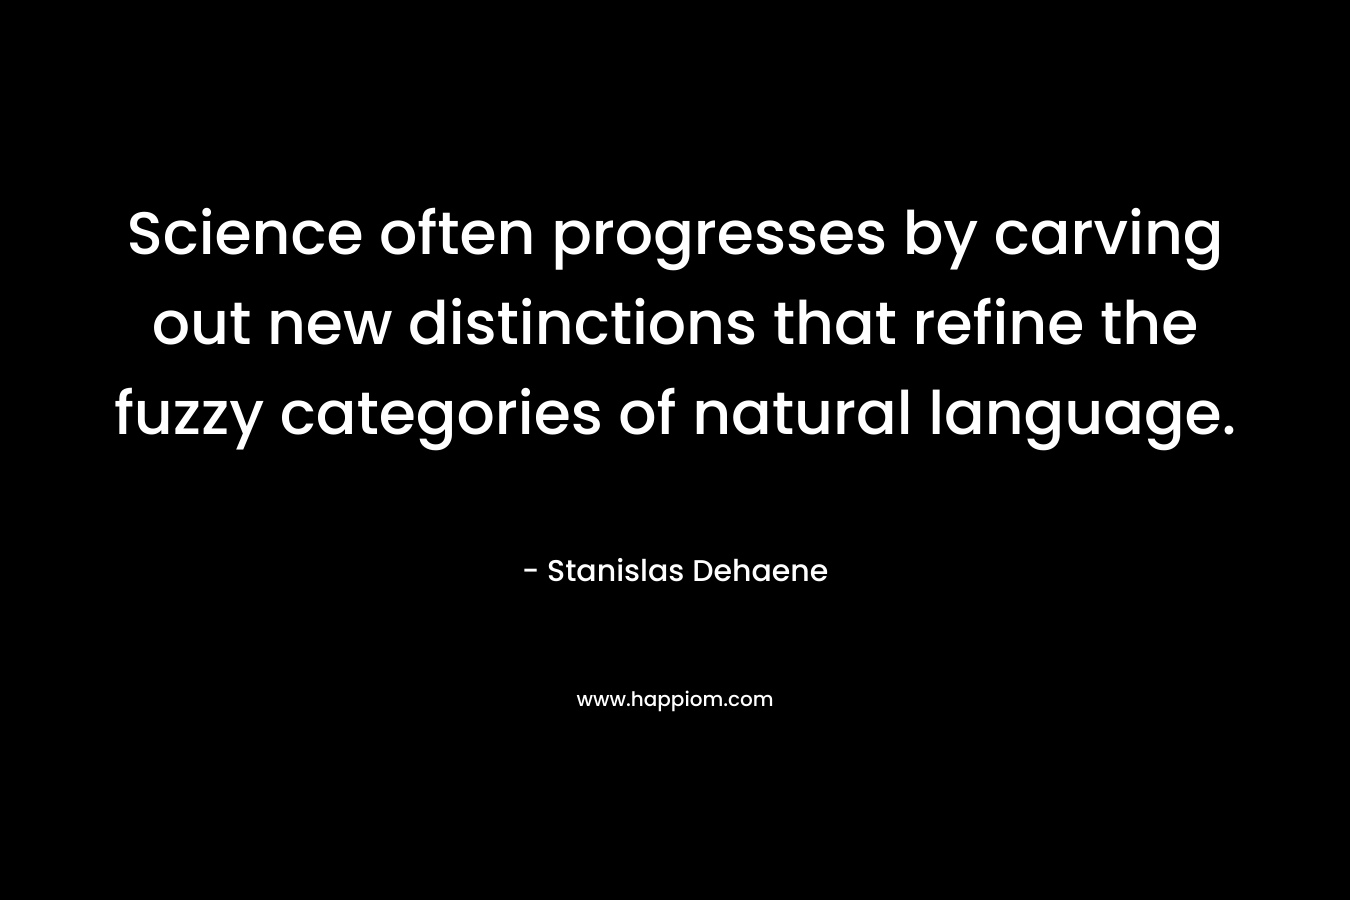 Science often progresses by carving out new distinctions that refine the fuzzy categories of natural language. – Stanislas Dehaene